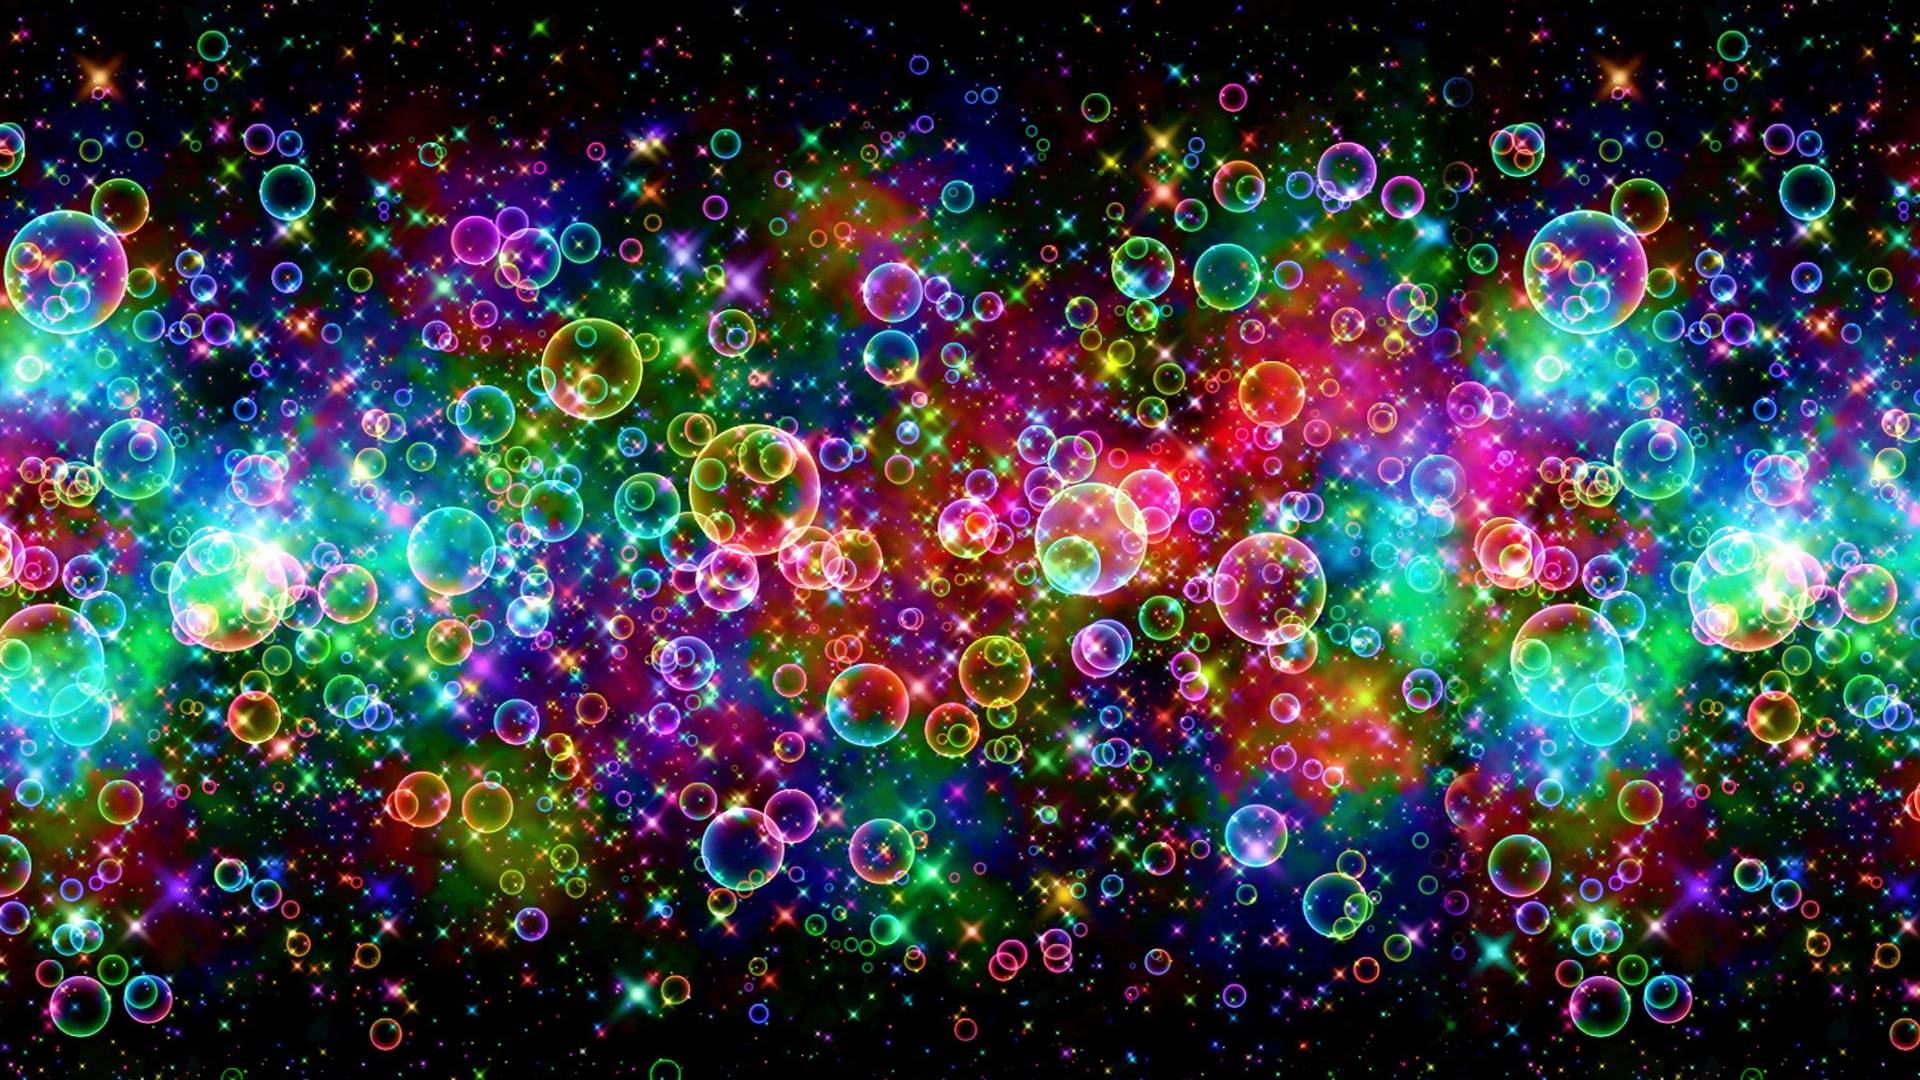 Stunning Colorful D Wallpaper 1920x1080PX Colorful Wallpaper